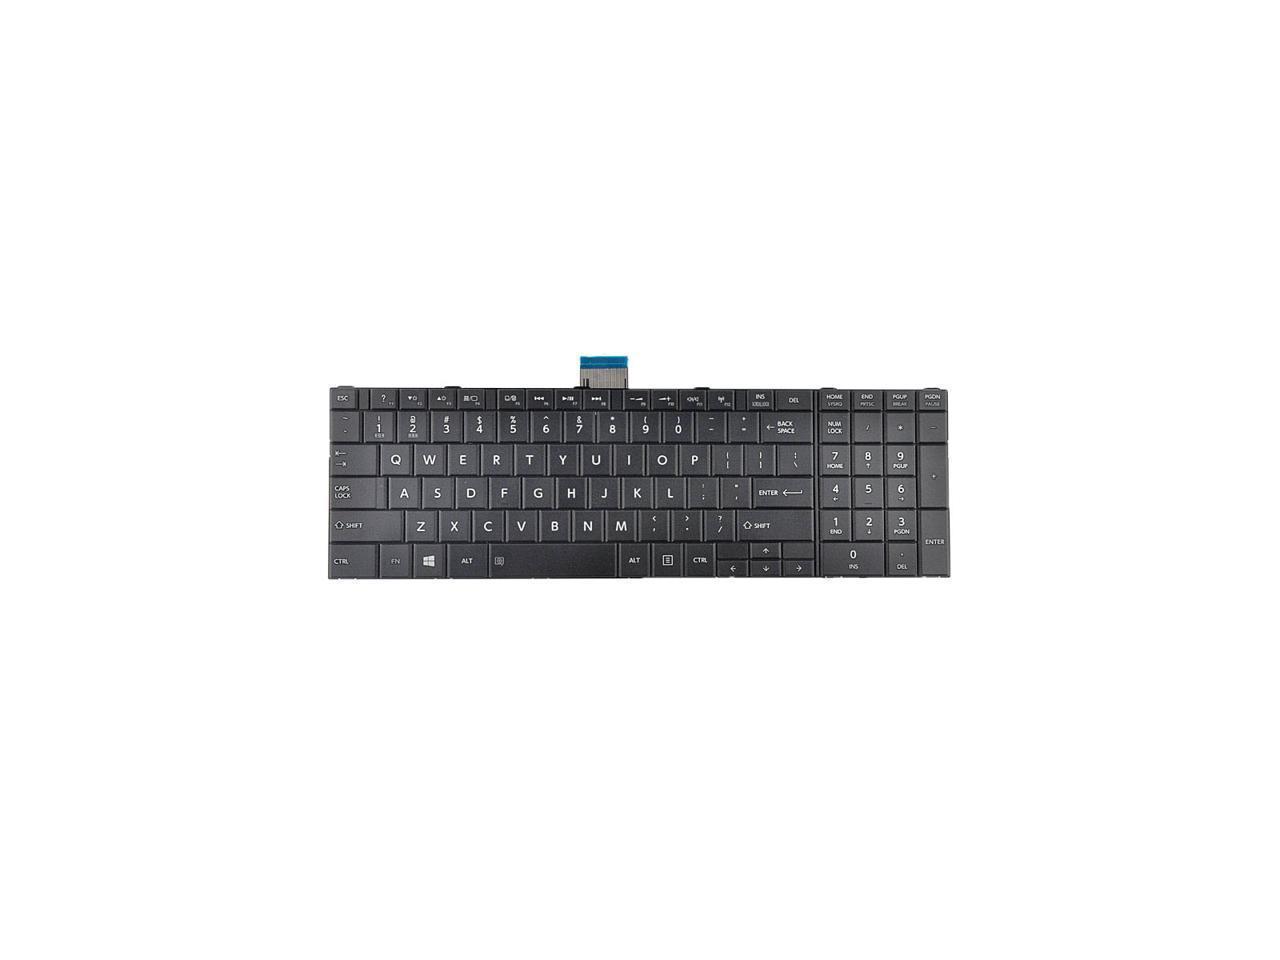 Laptop Keyboard Compatible for Toshiba Satellite L55DT-B5144 L55Dt-B5256 L55T-B5188 L55T-B5271 L55T-B5278 L55T-B5330 L55T-B5334 L55t-B5257W US Layout Black Color with Backlit